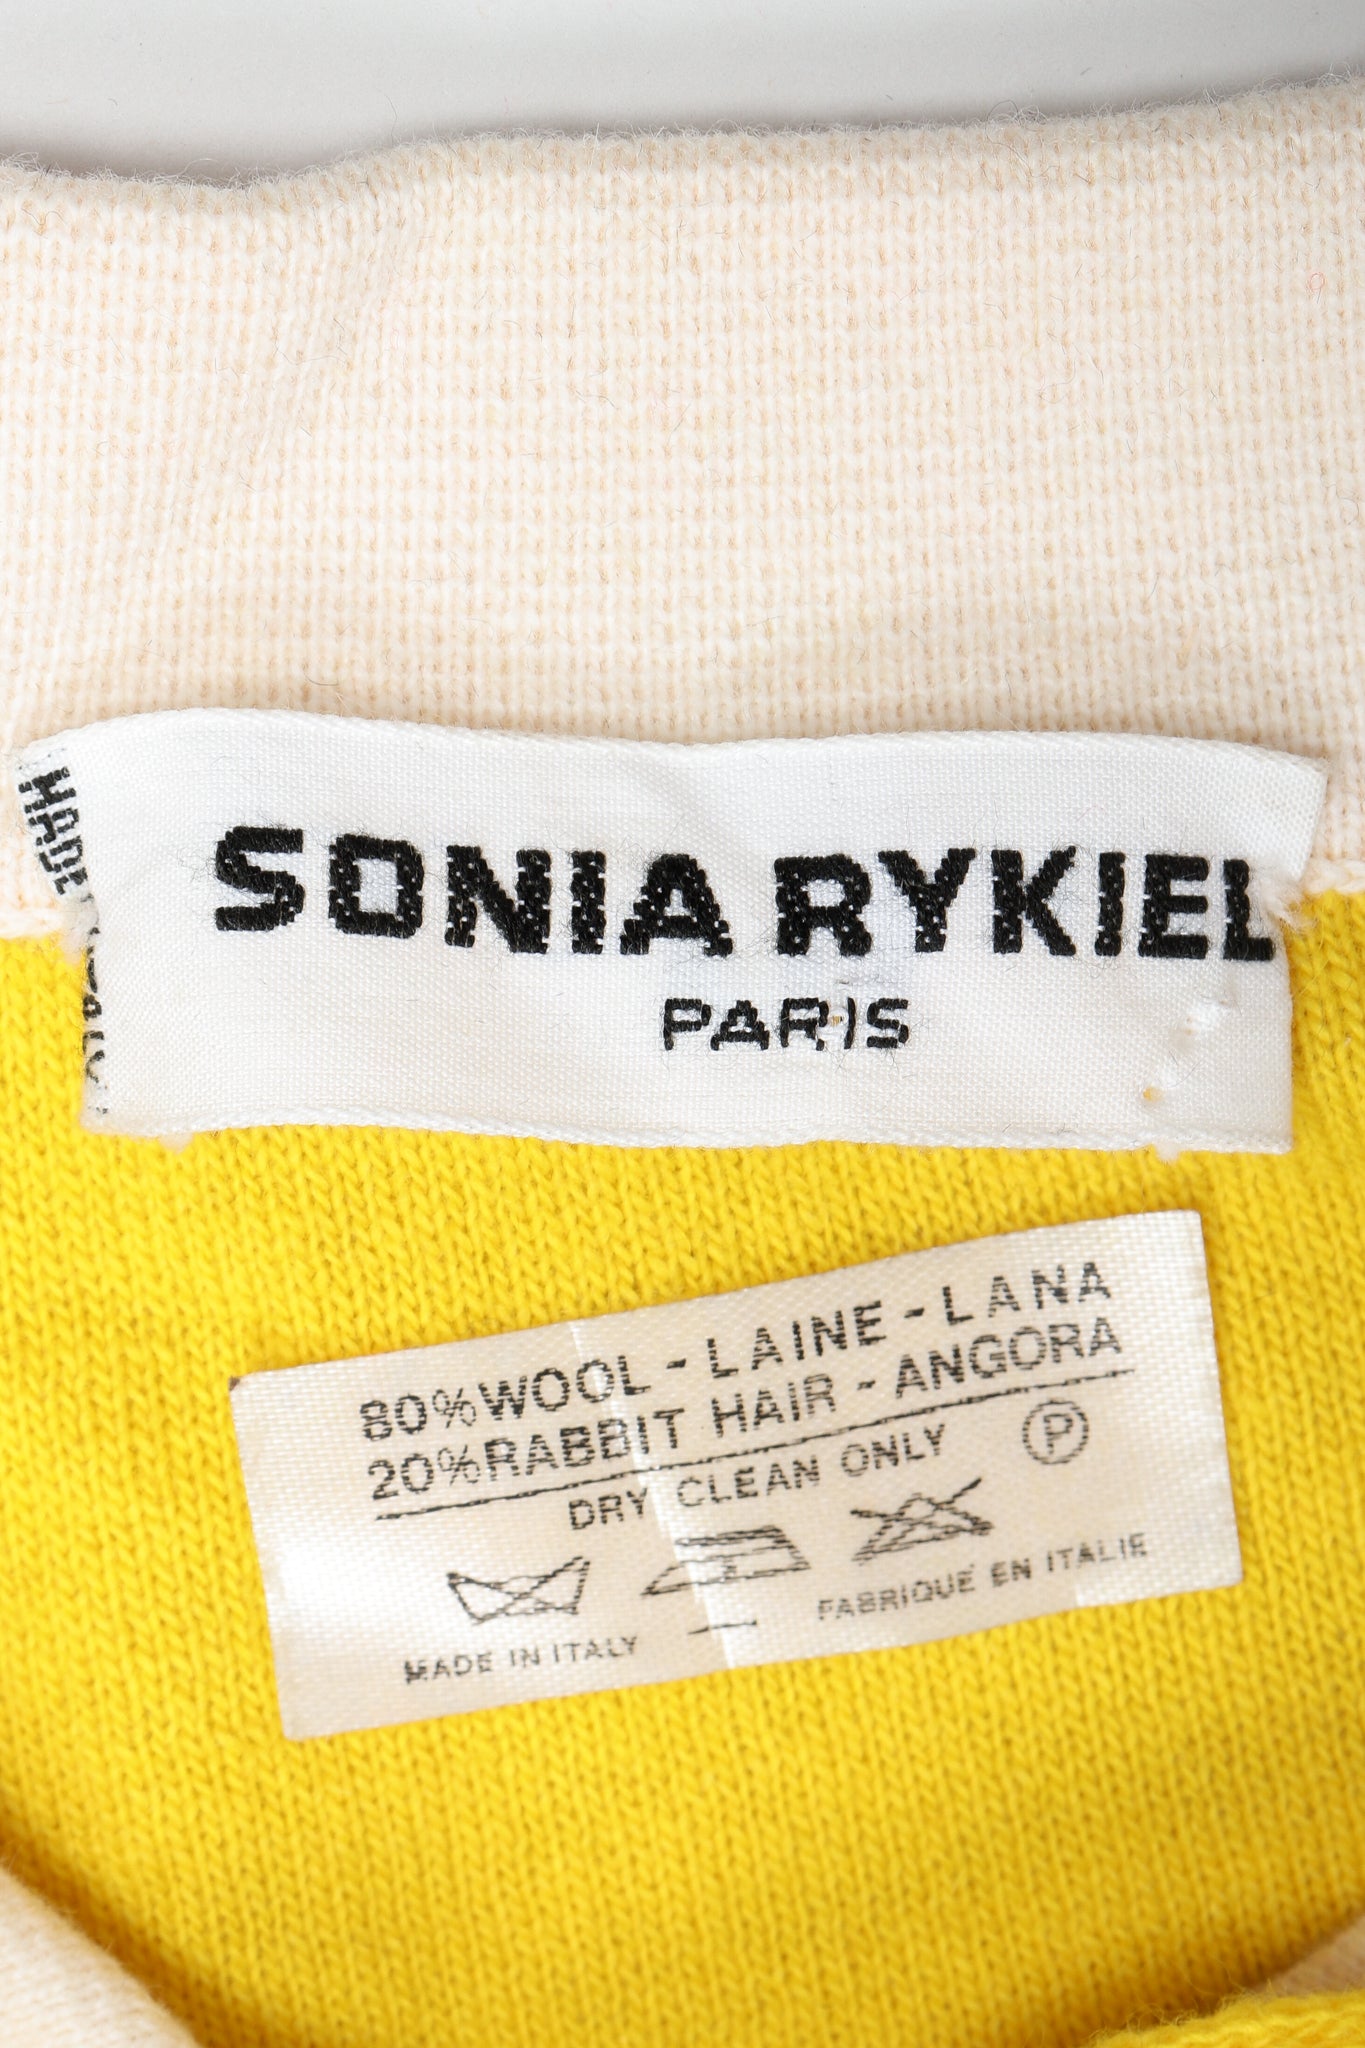 Vintage Sonia Rykiel Label and Contents on Yellow